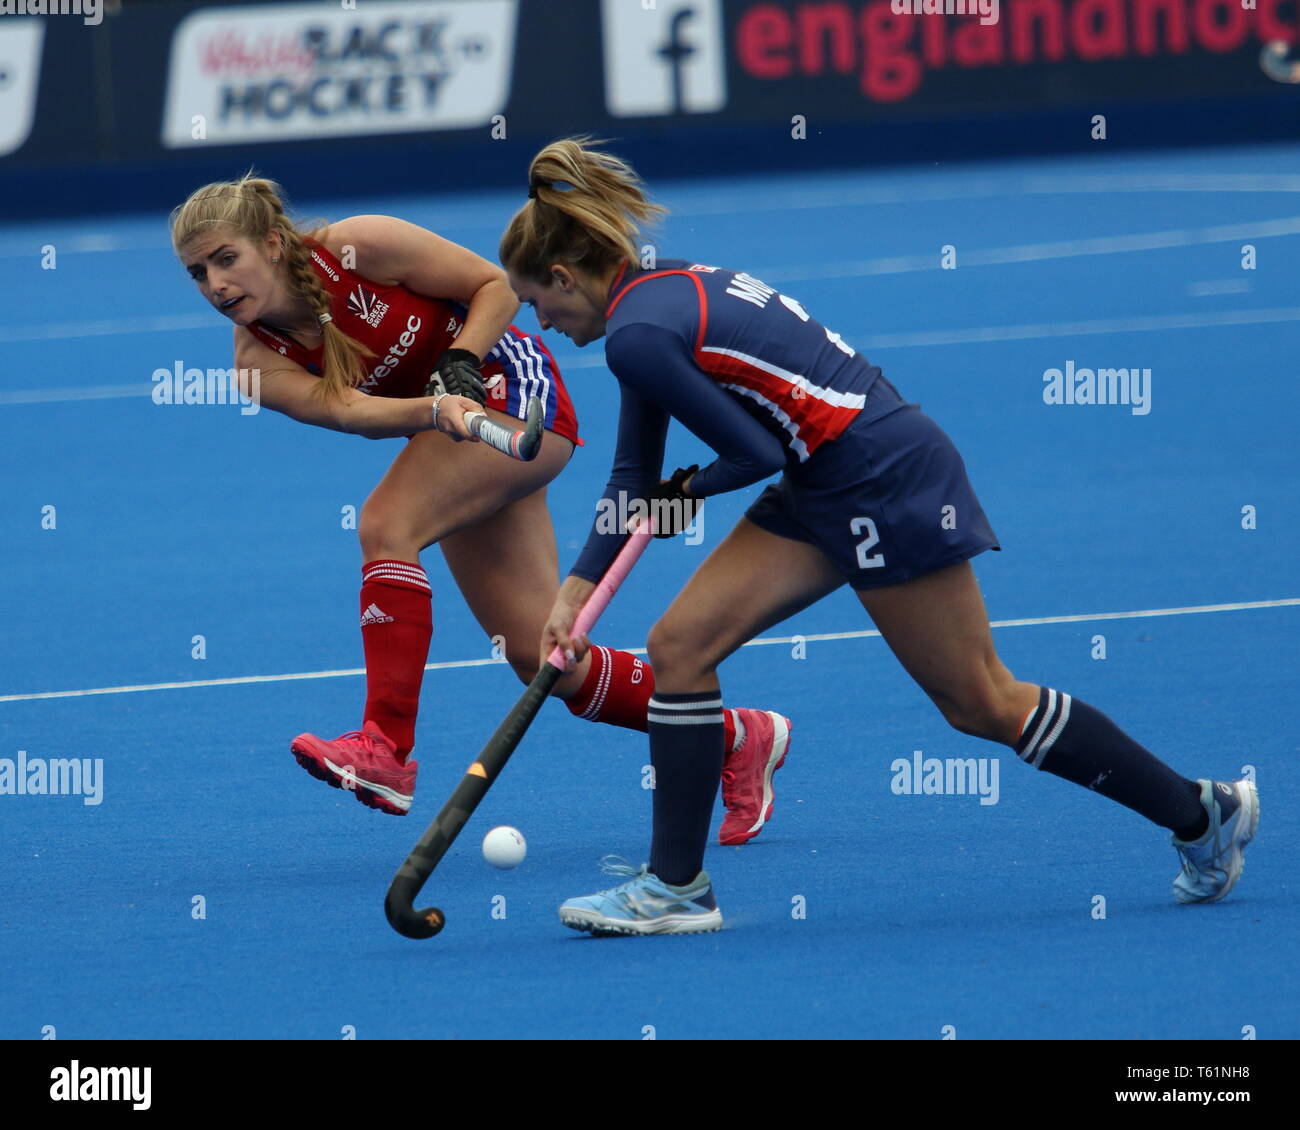 Sarah Evans (GBR) and Lauren Moyer (USA) in the 2019 FIH Pro League Great Britain v United States women’s hockey match at the Olympic Park, London Stock Photo